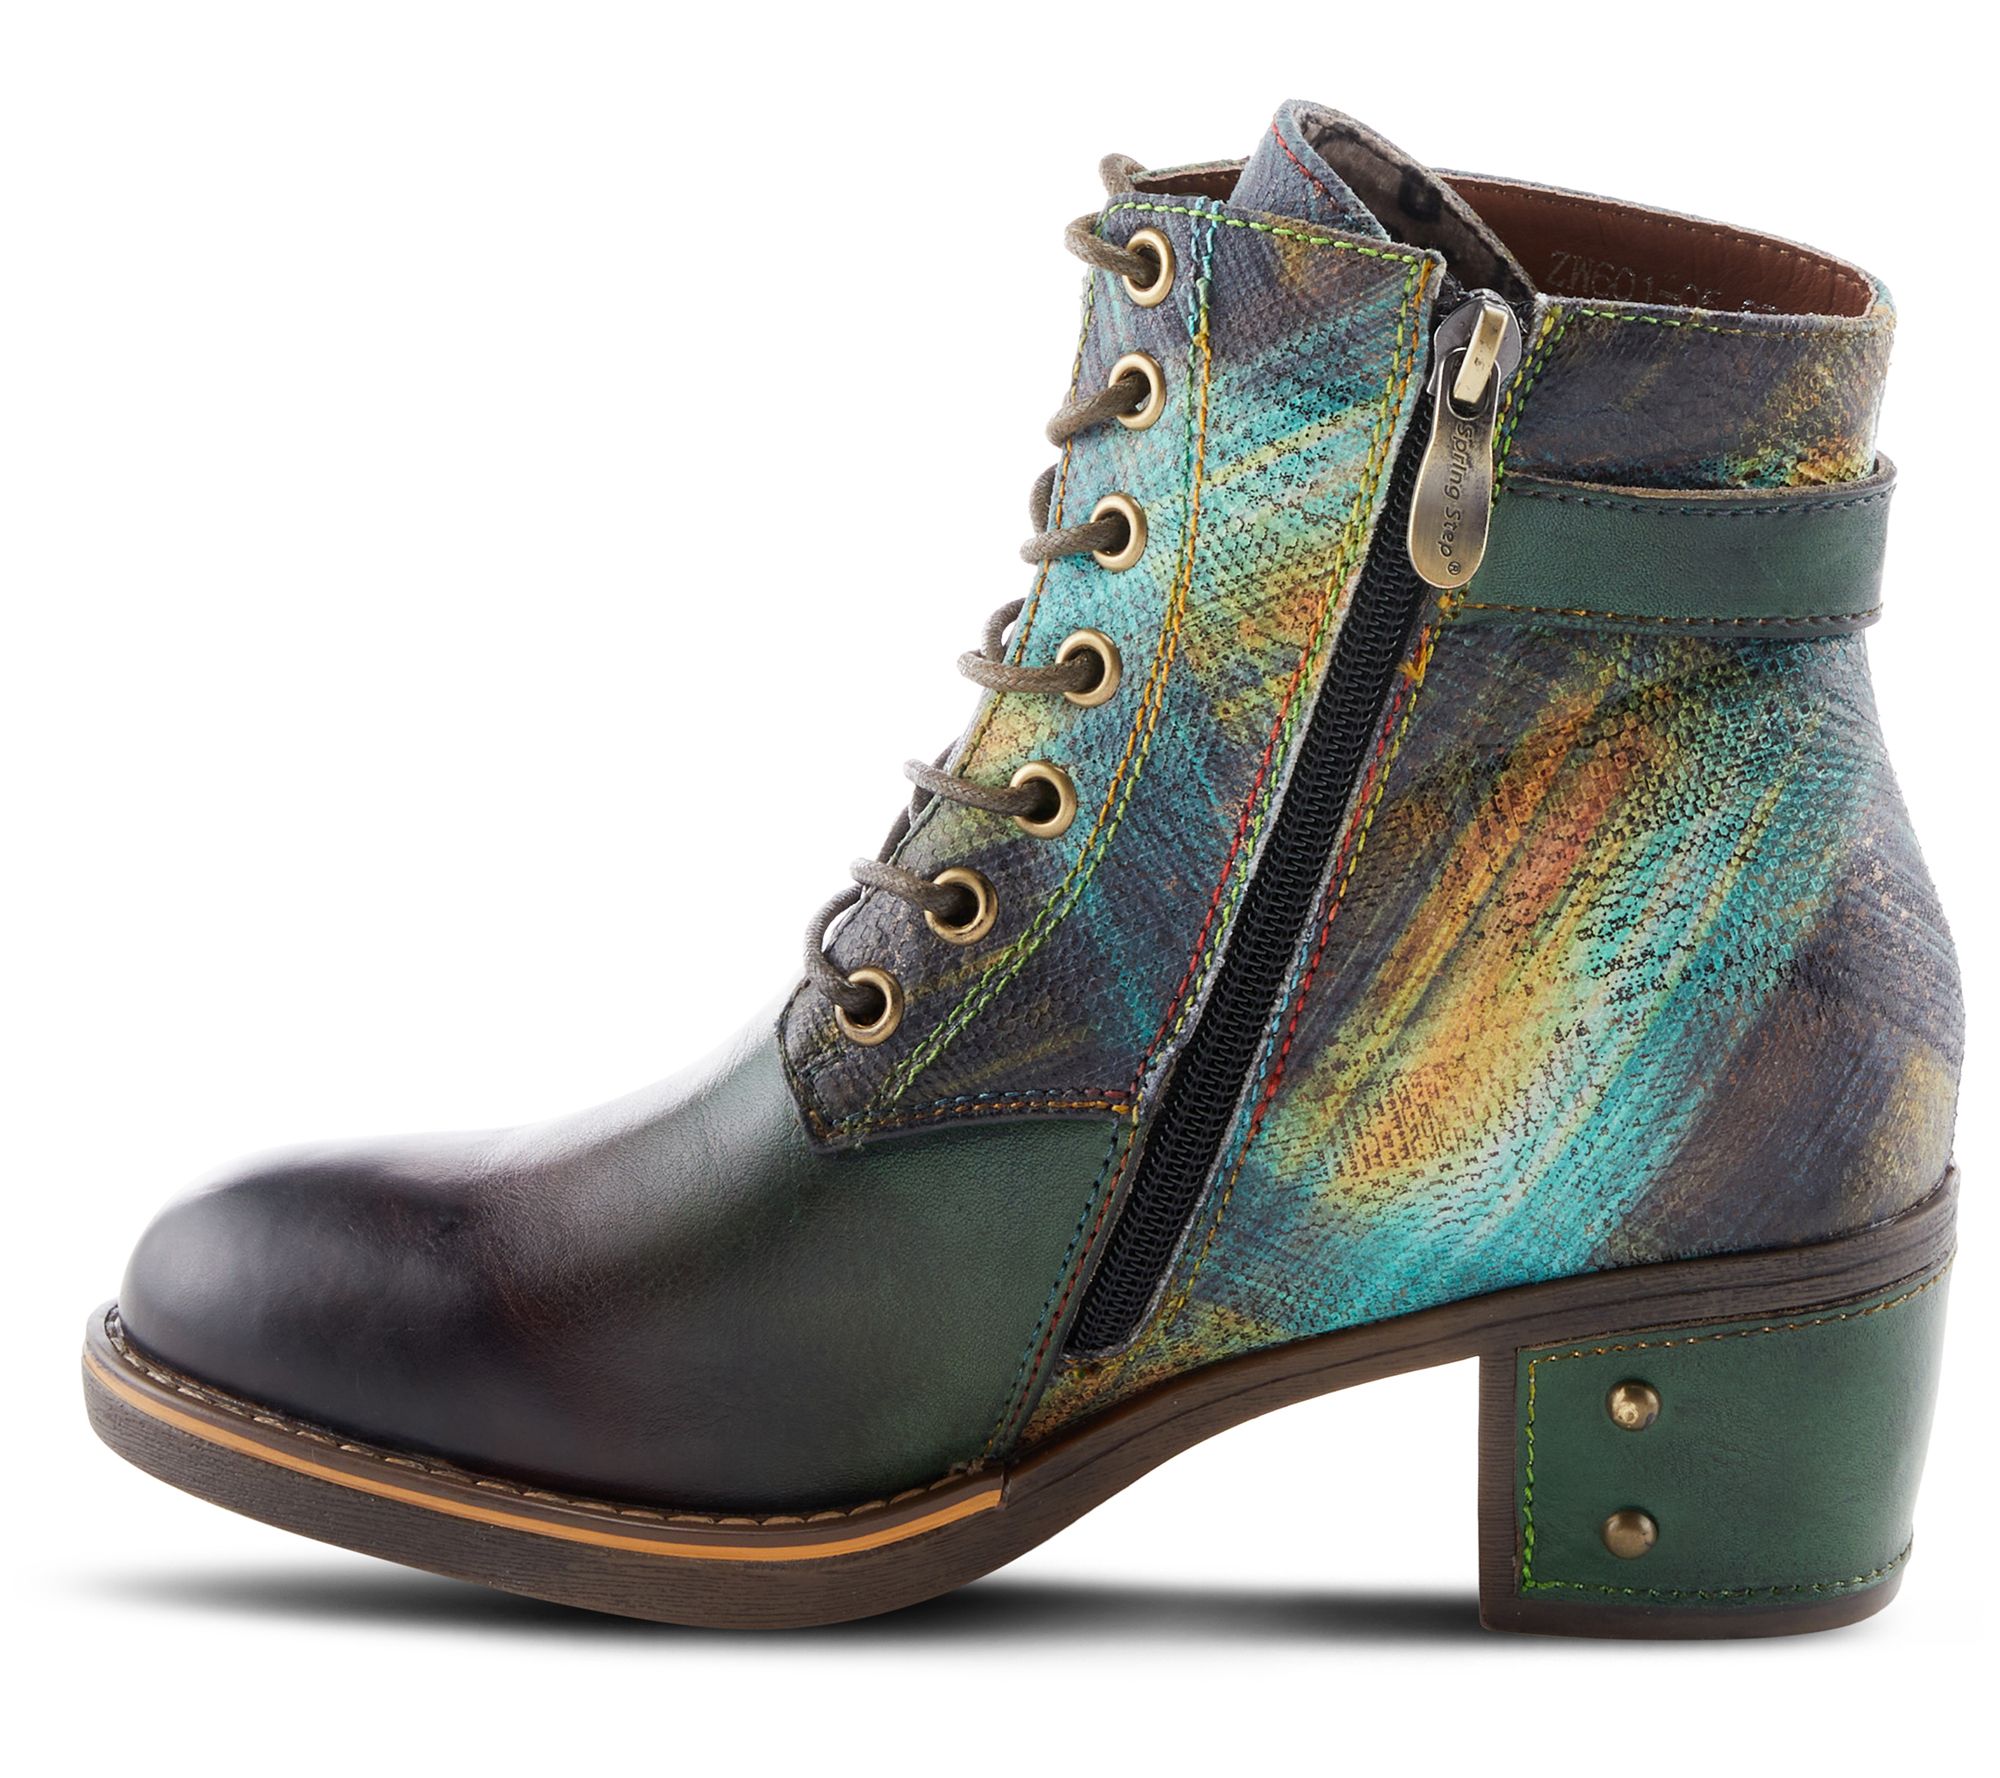 L`Artiste by Spring Step Lace-Up Booties - Harm onic - QVC.com